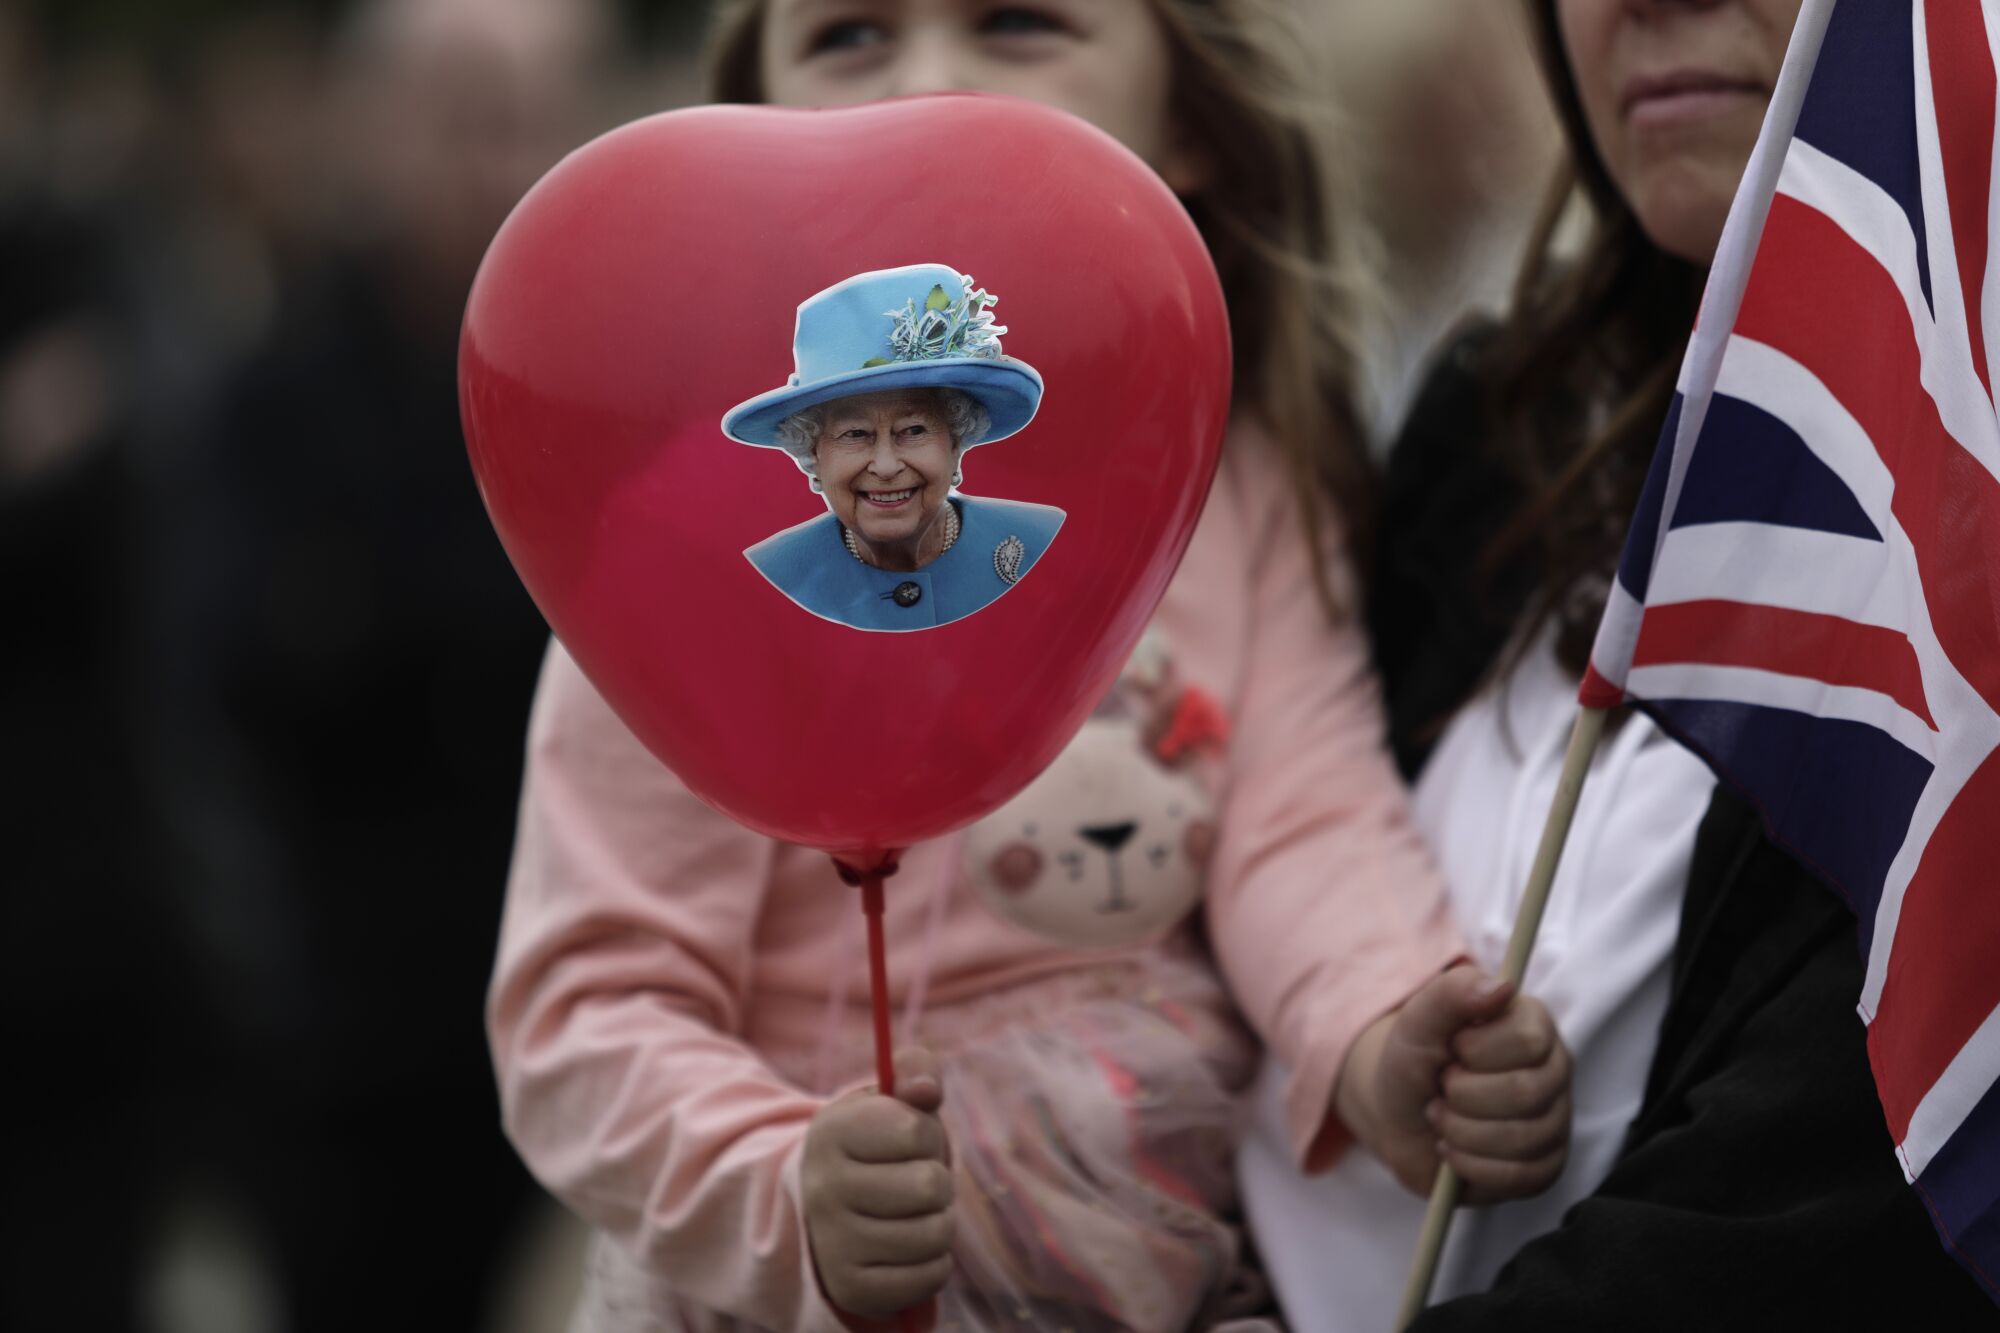 A girl holds a balloon with a photo of the queen and a Union Jack flag.